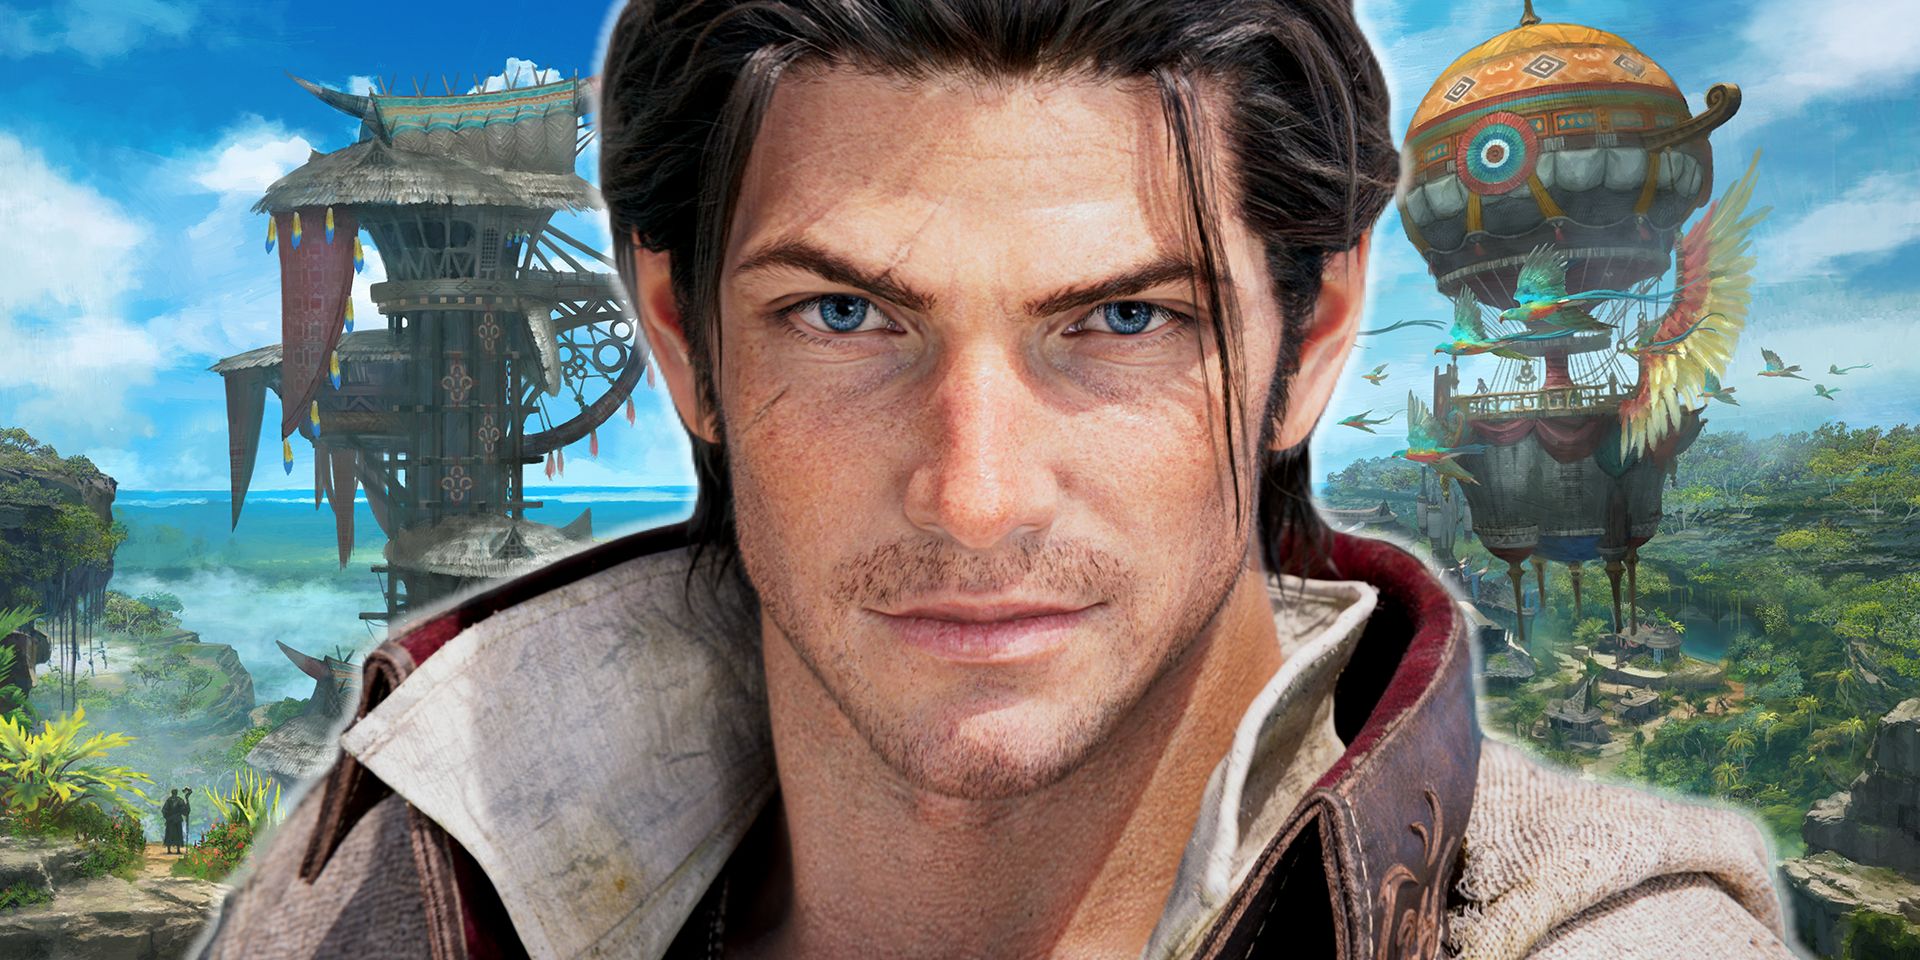 The default warrior of light, with blue eyes and stringy black hair, smirks at the camera. In the backdrop, a dirigble floats next to a spiraling tower.